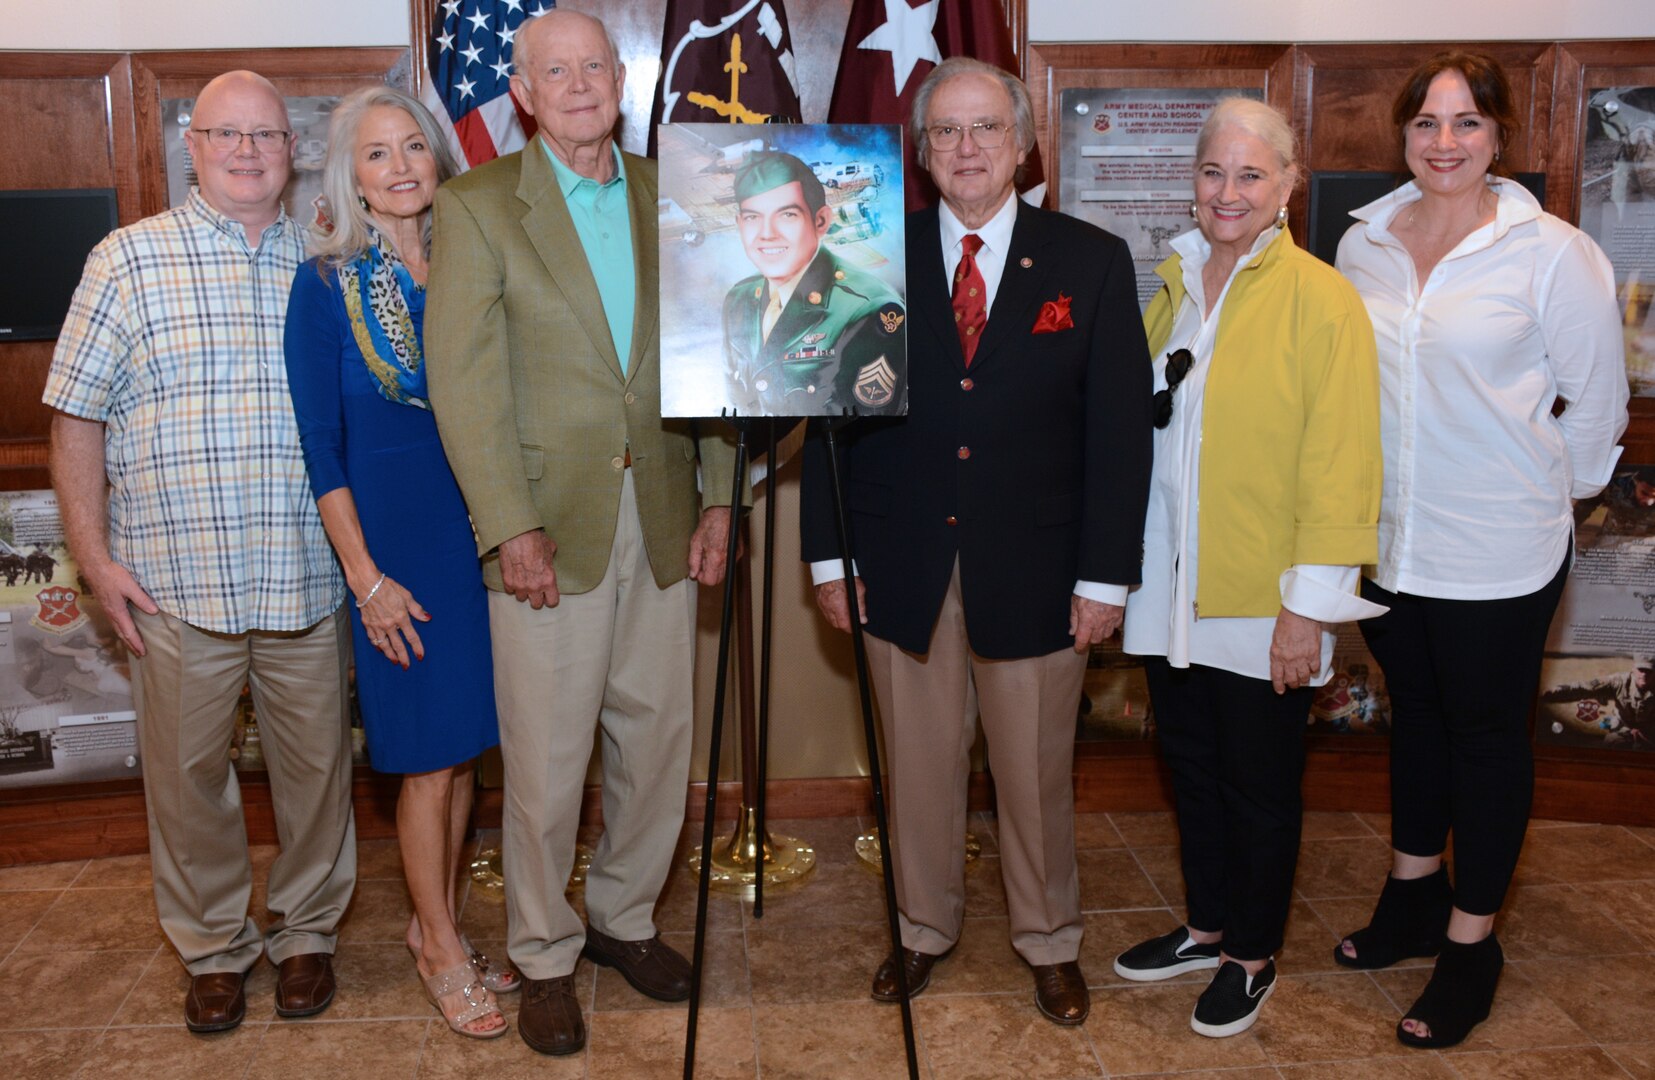 (From left) Bubba Brice, Frances Younger, John F. Younger Jr., Charles M. Younger, "Chica" Younger and Galeana Younger pose with a portrait of Bobby Joe Younger, a World War II bombardier killed in action in 1944. The family were presented with Younger’s military awards posthumously received from the Department of the Army.